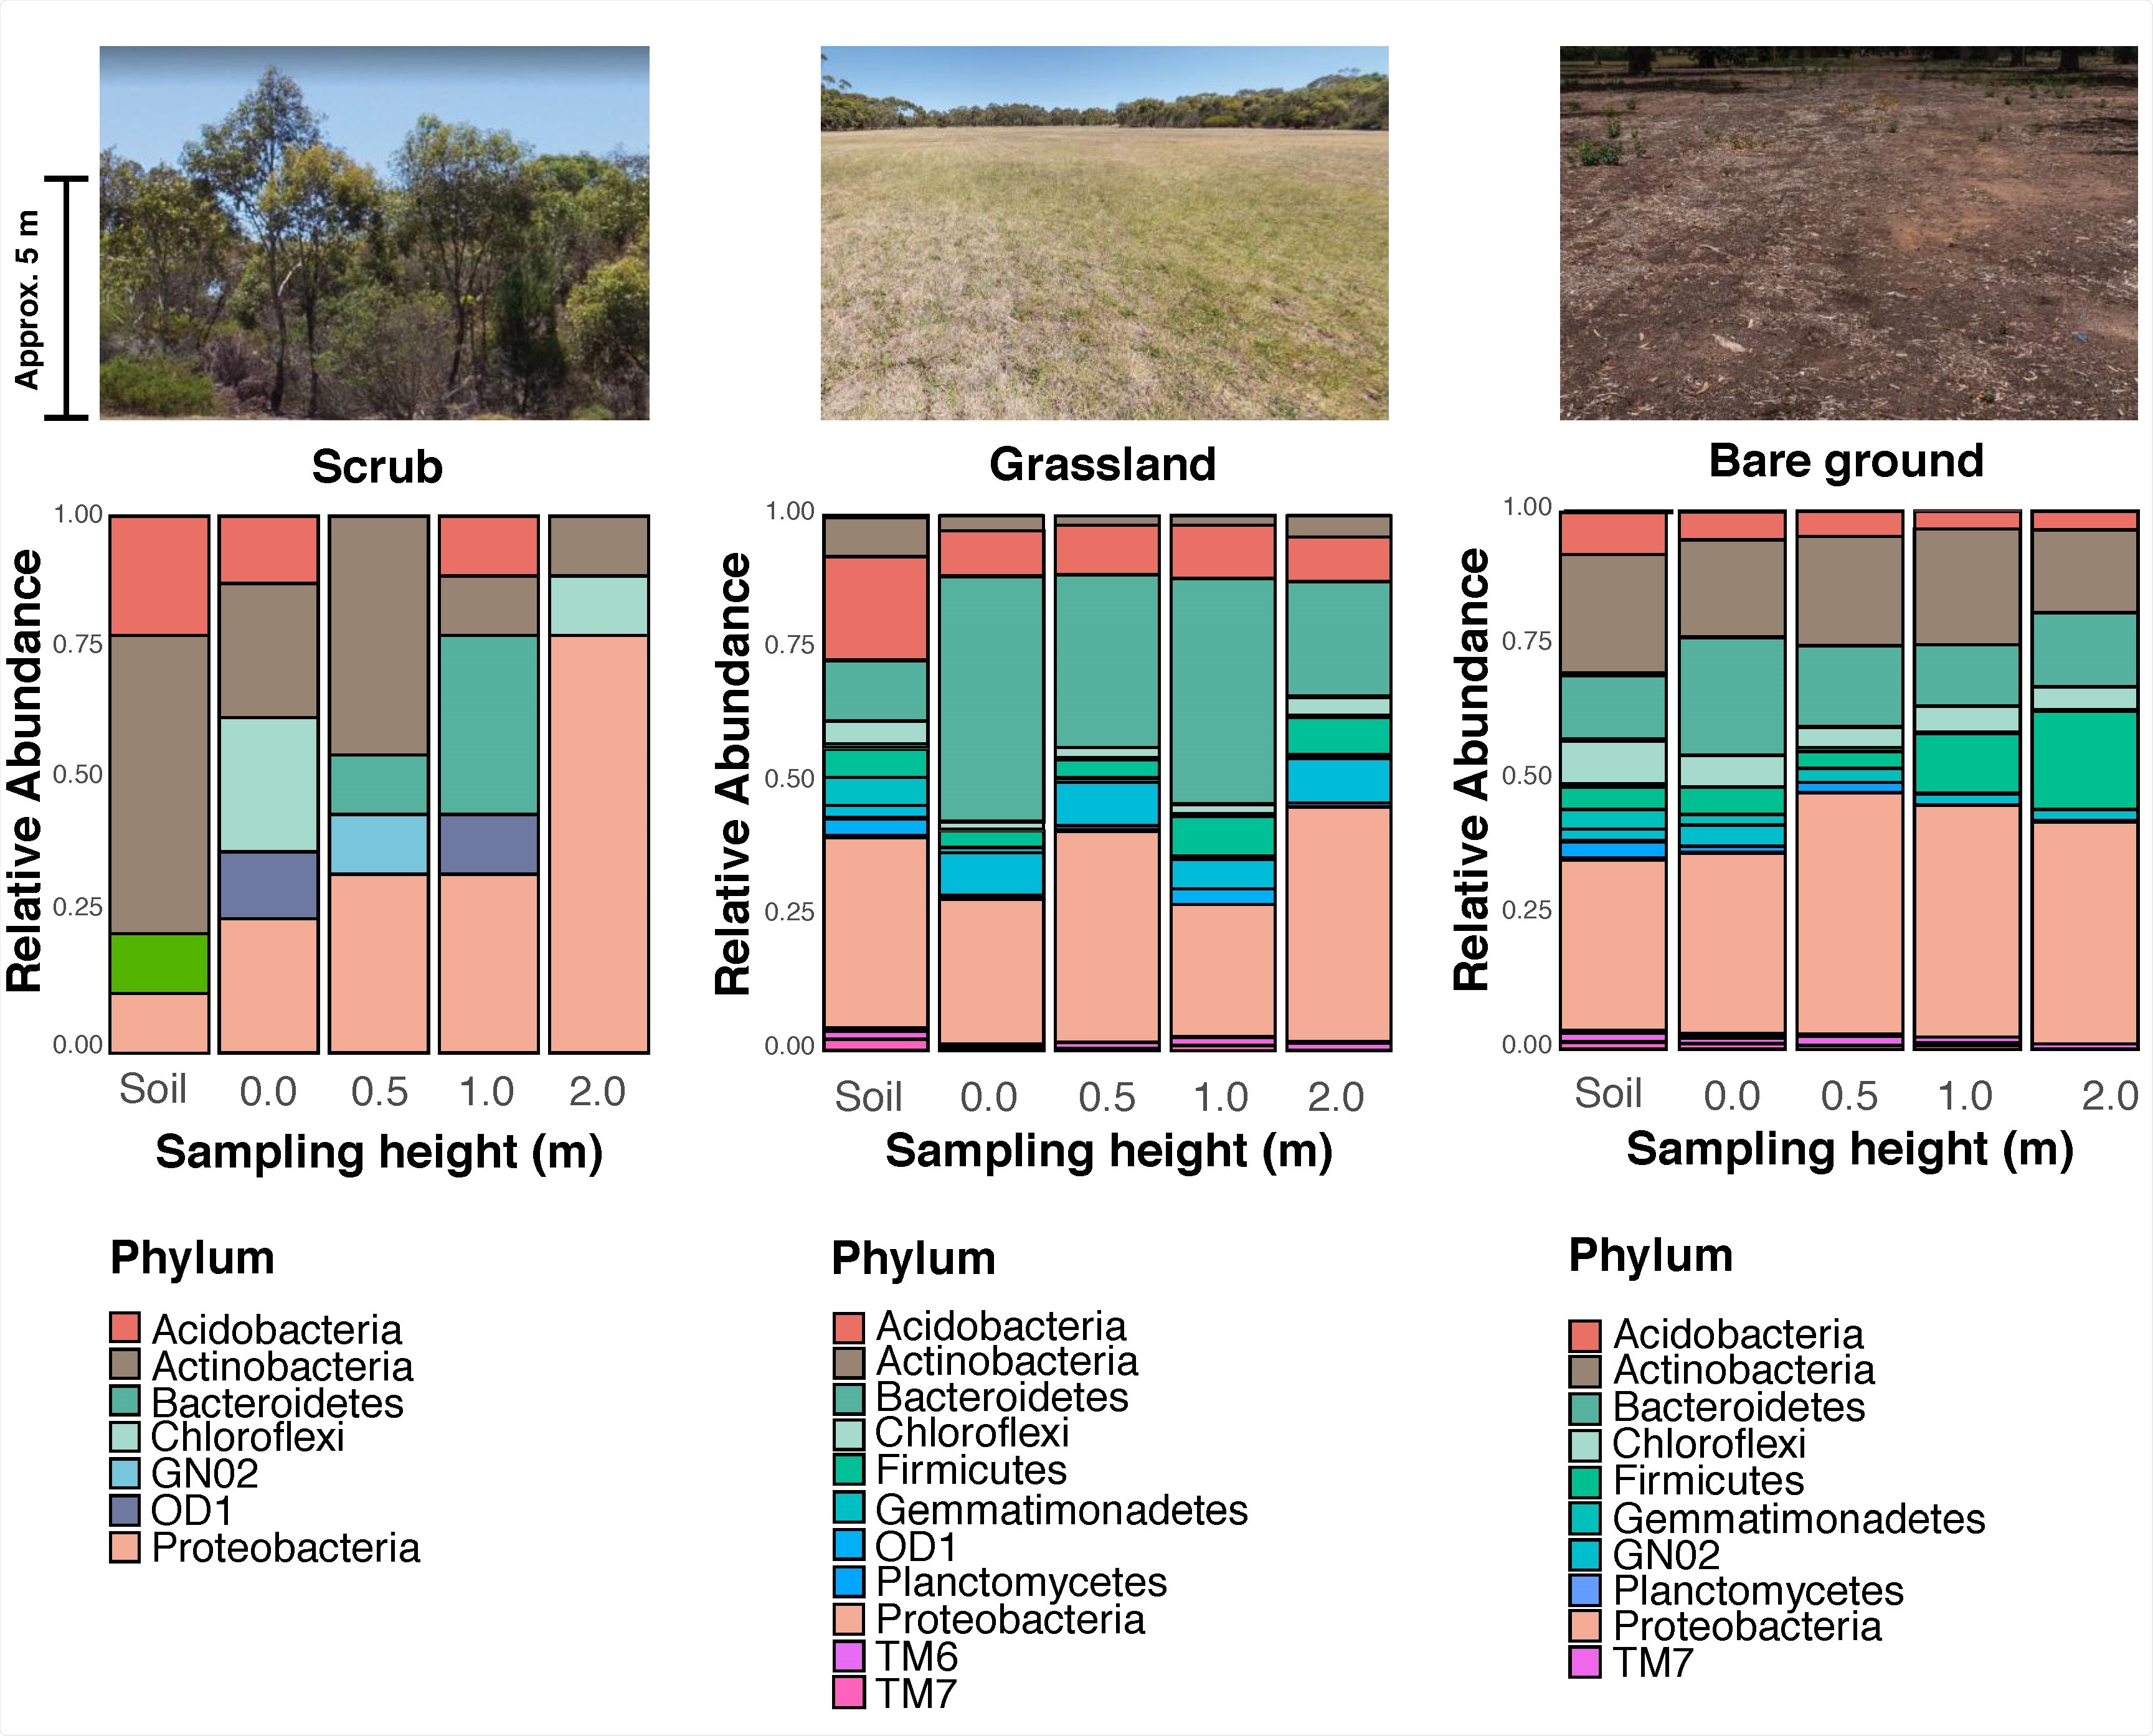 Profile of bacterial communities from each habitat at the phylum level. The coloured area of each bar represents the relative abundance of the corresponding phylum over 1%. The X-axis displays sampling heights: soil, 0.0 m, 0.5 m, 1.0 m, and 2.0 m (from left to right). The photographs above the plots show examples of each habitat used in the study (photographs by authors).